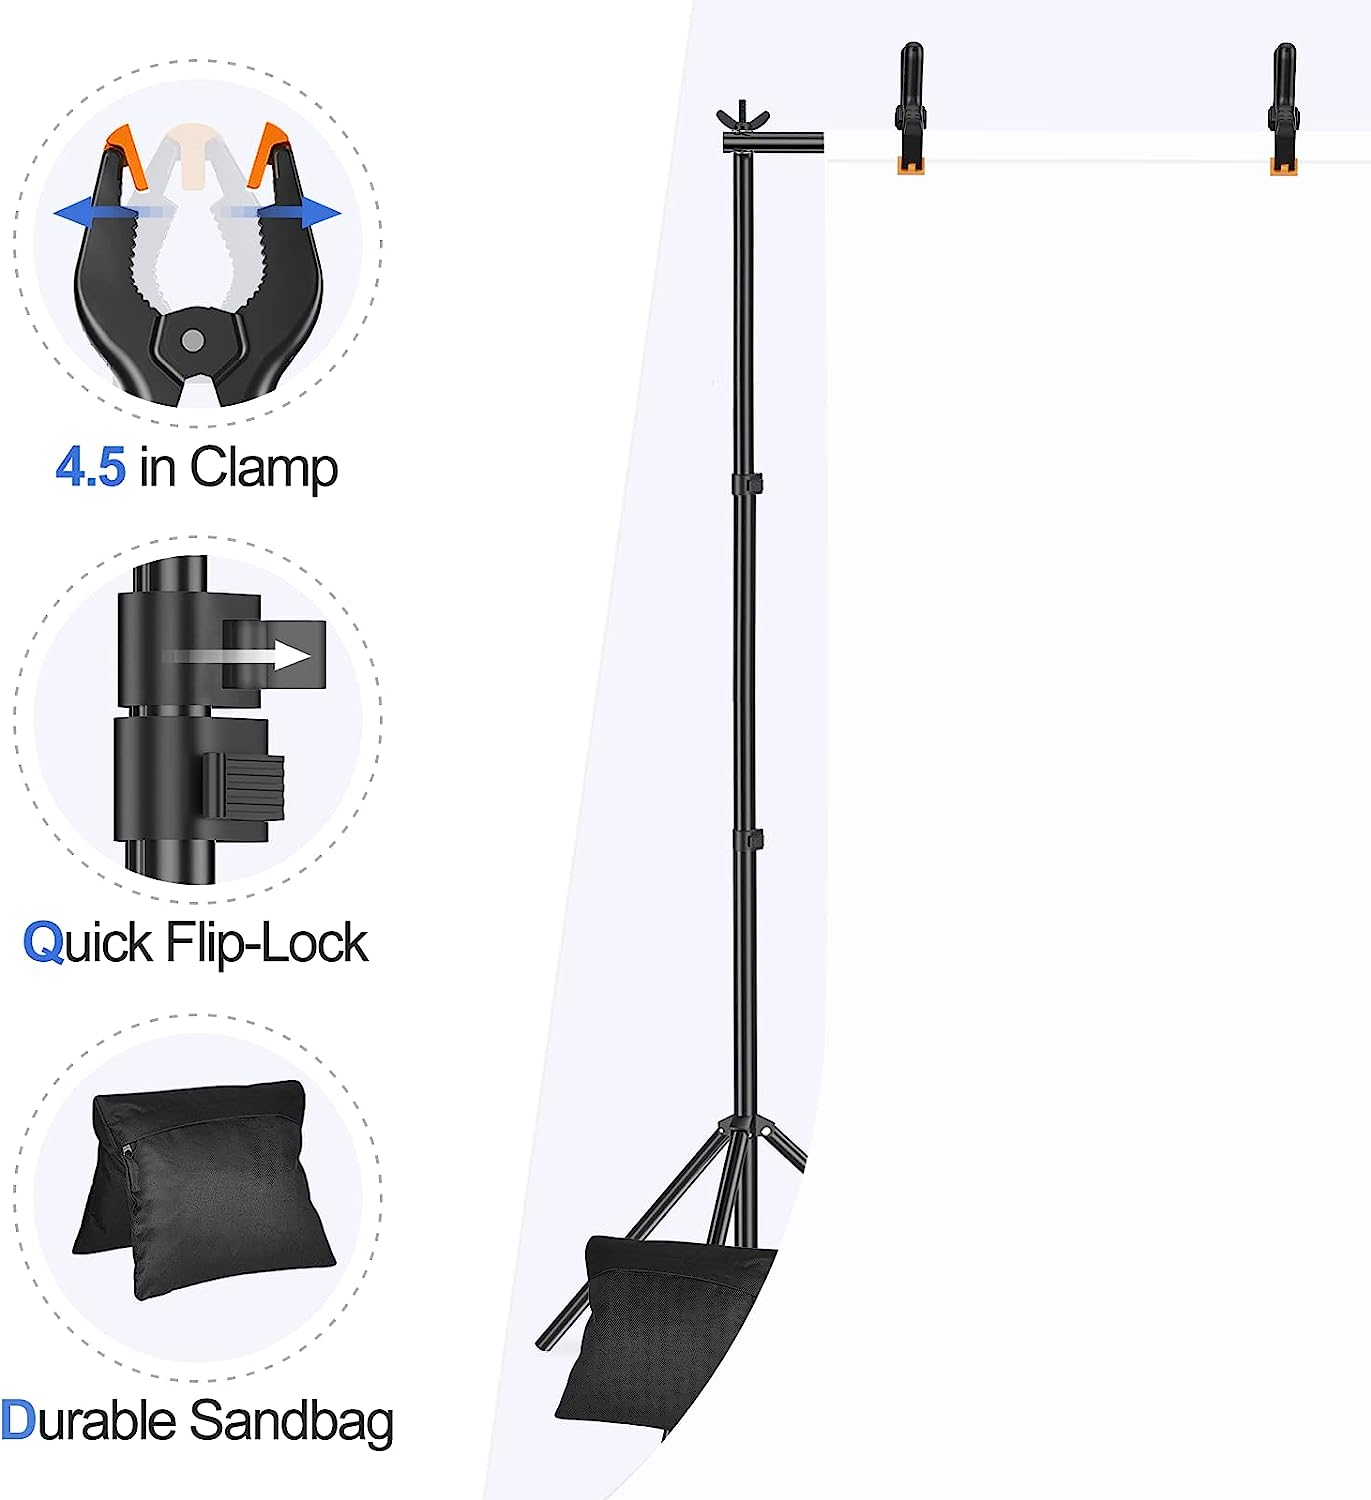 EMART Photo Video Studio 10Ft Adjustable Background Stand Backdrop Support System Kit with Carry Bag